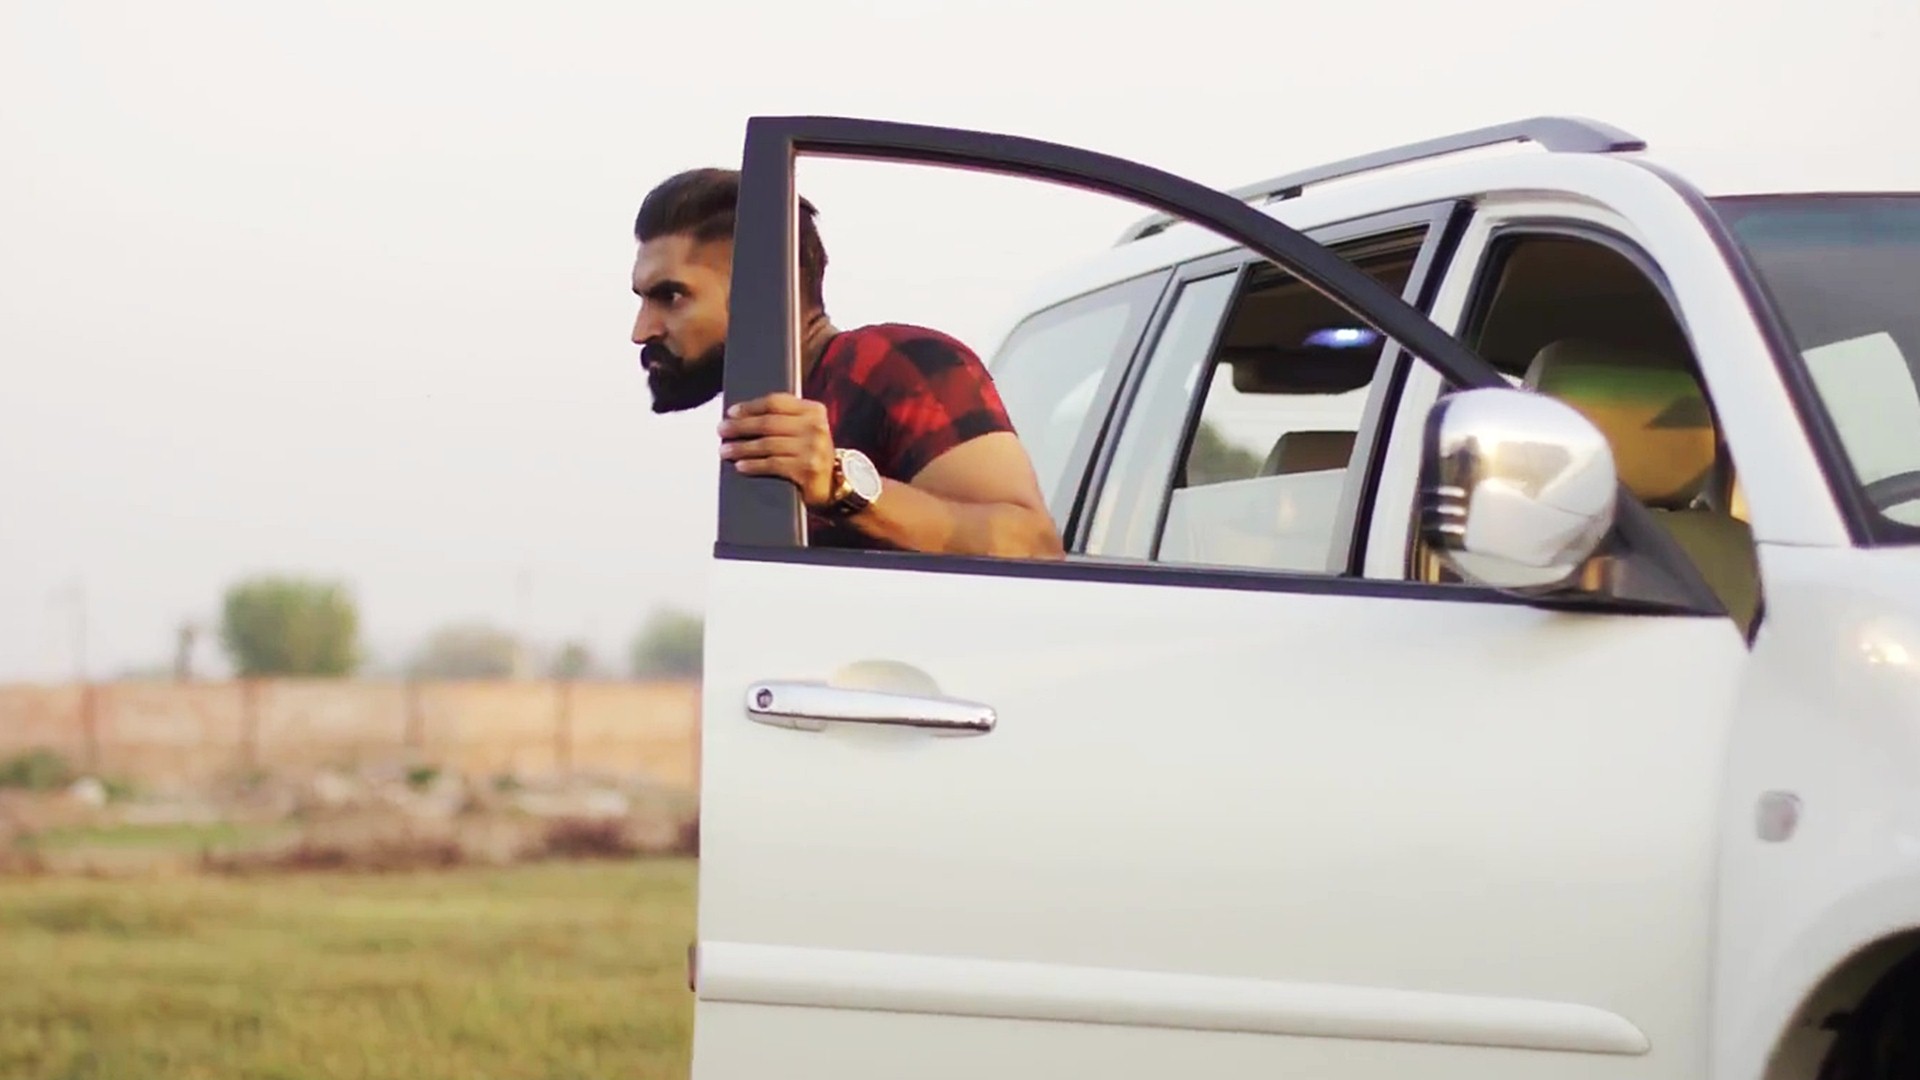 Parmish Verma 2016 Wallpaper - Parmish Verma Wallpapers 1080px , HD Wallpaper & Backgrounds